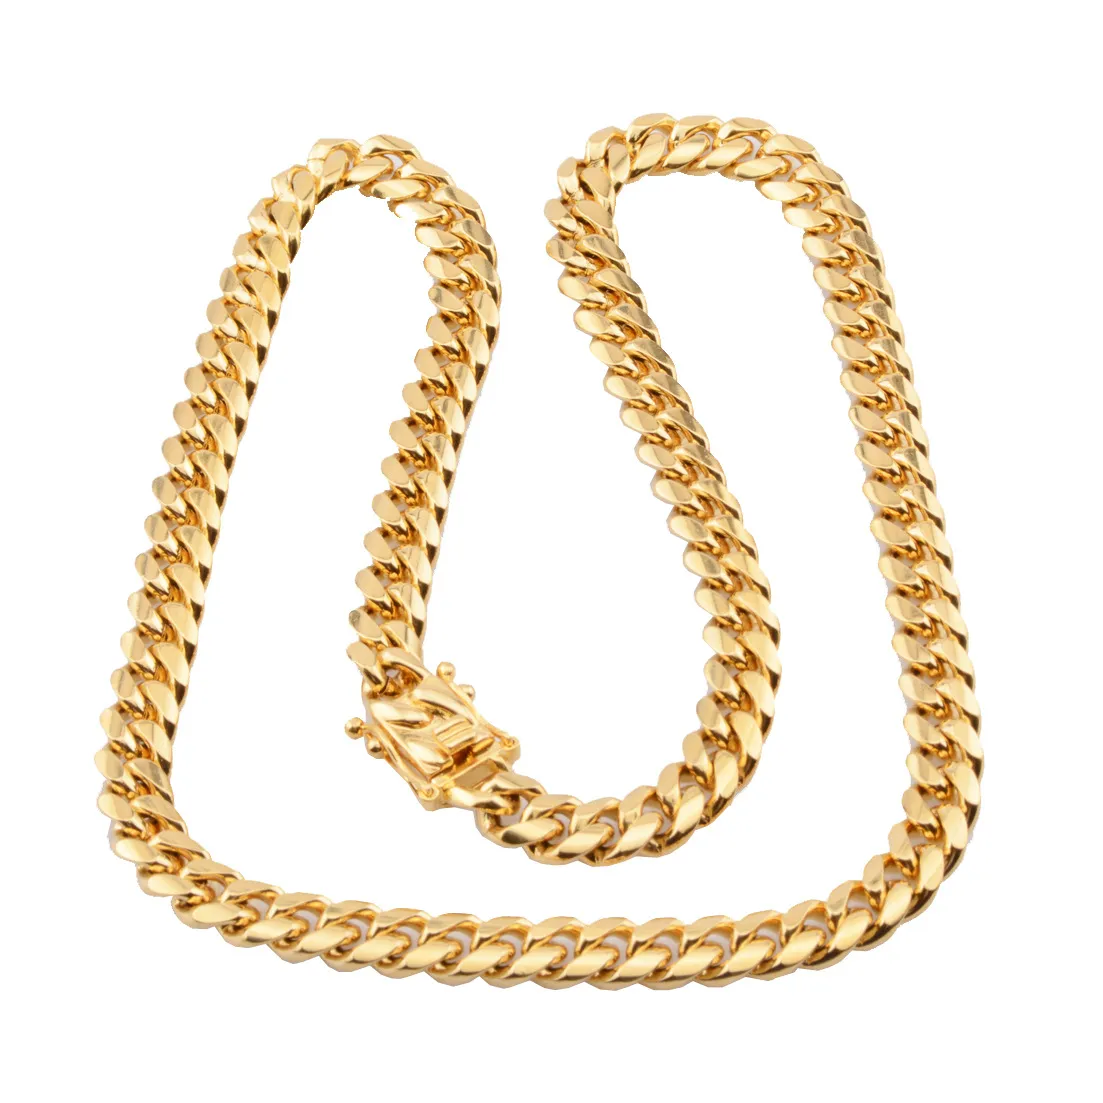 8mm 10mm 12mm 14mm 16mm Miami Cuban Link Chains Stainless Steel Mens 14K Gold Chains High Polished Punk Curb Necklaces2722